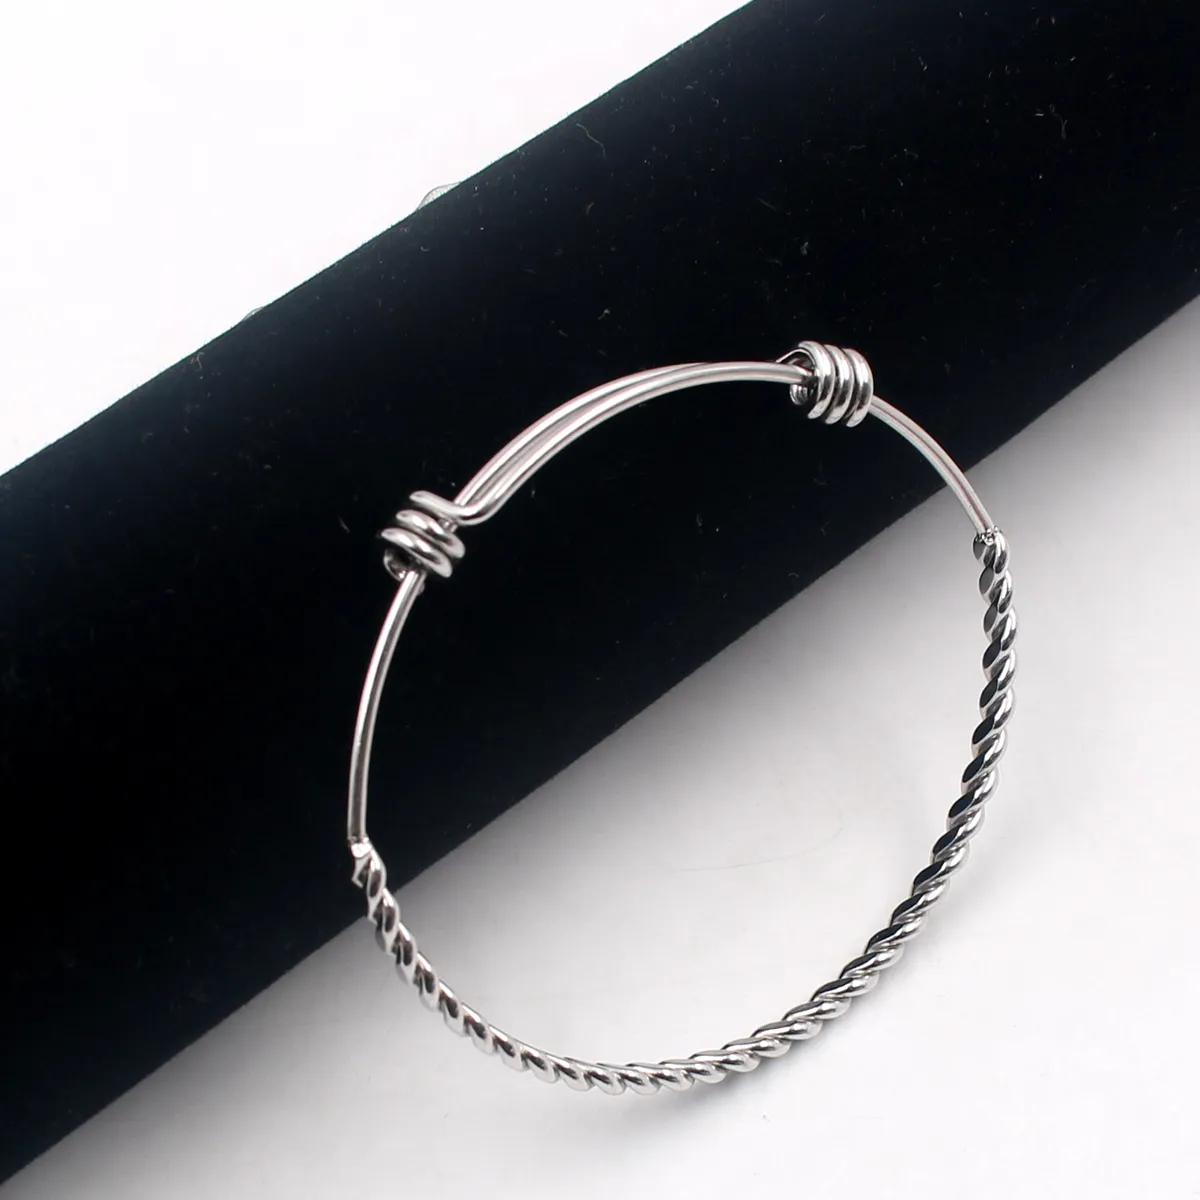 Adjustable Bangle Bracelet Thin 1.6mm THICK Expandable Bracelets, Bulk Stainless Steel Jewelry Making Supplies 65MM High quality